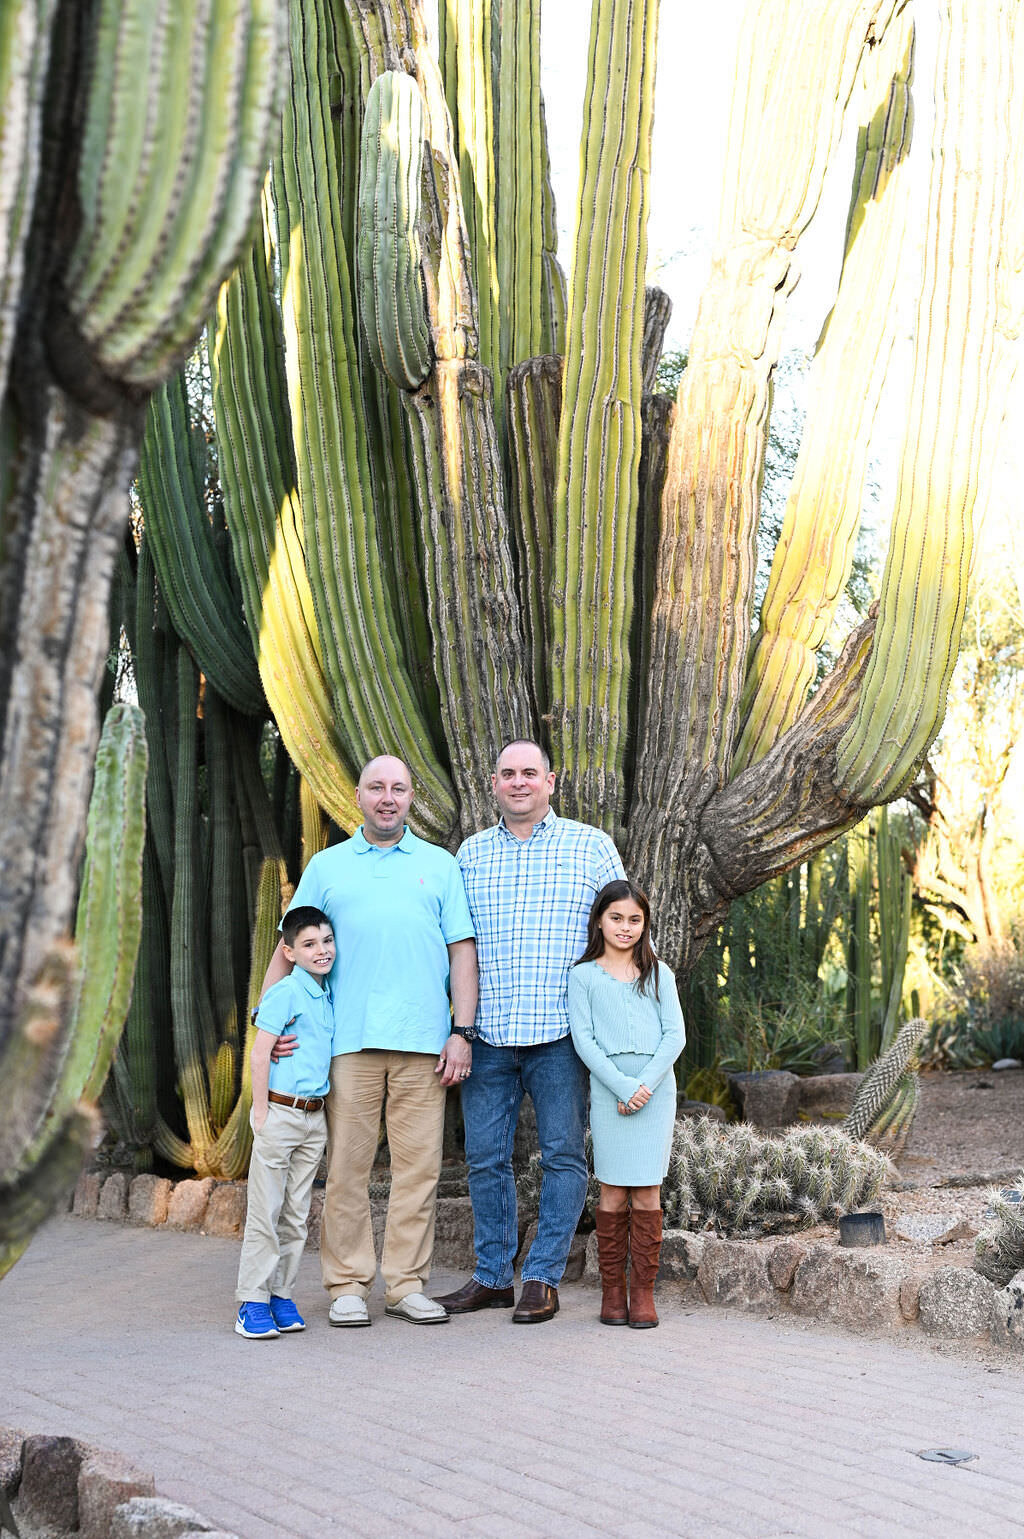 Parents standing with their kids in front of a large cactus